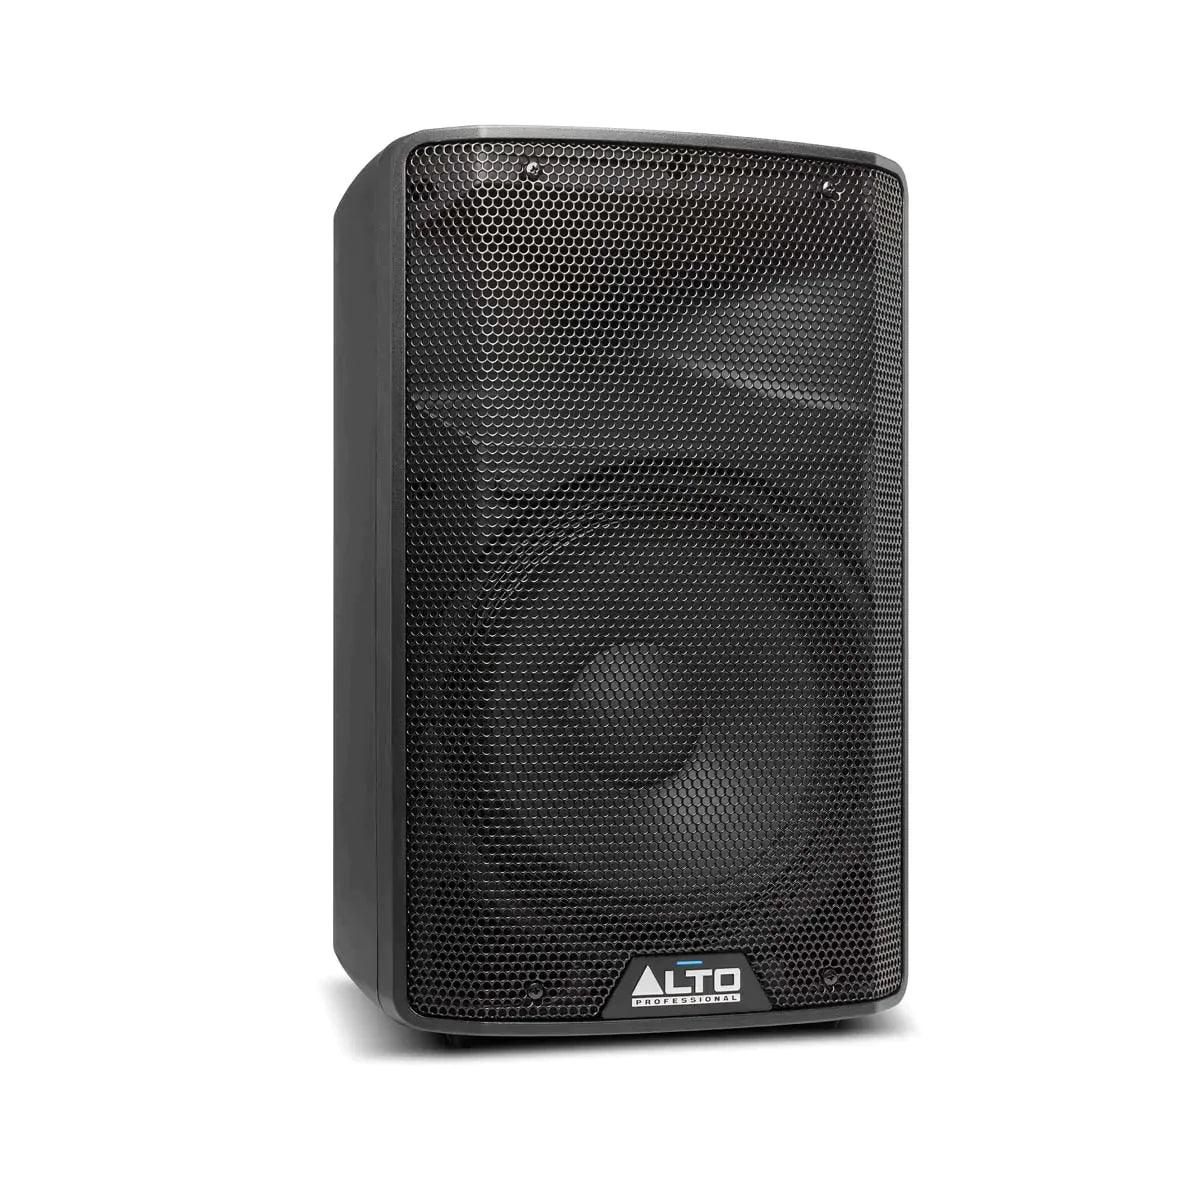 Alto Pro TX310 300w 10inch Active Loudspeaker - Live & Recording - PA Speakers by Alto Professional at Muso's Stuff